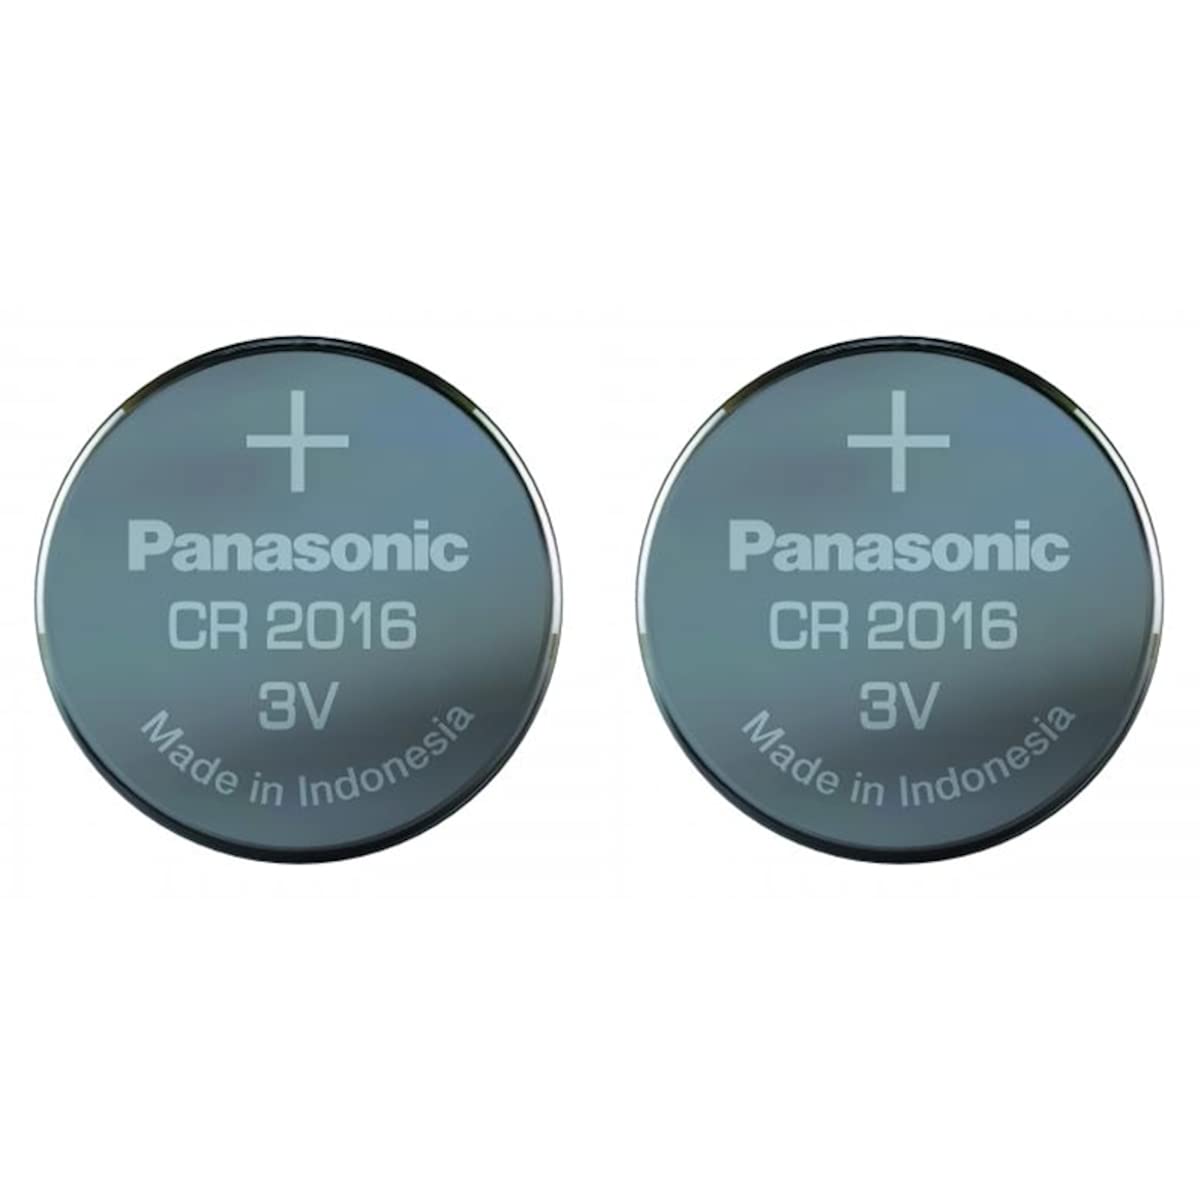 One (1) Twin Pack (2 Batteries) Panasonic CR2016 Lithium Coin Cell Battery 3v Blister Packed